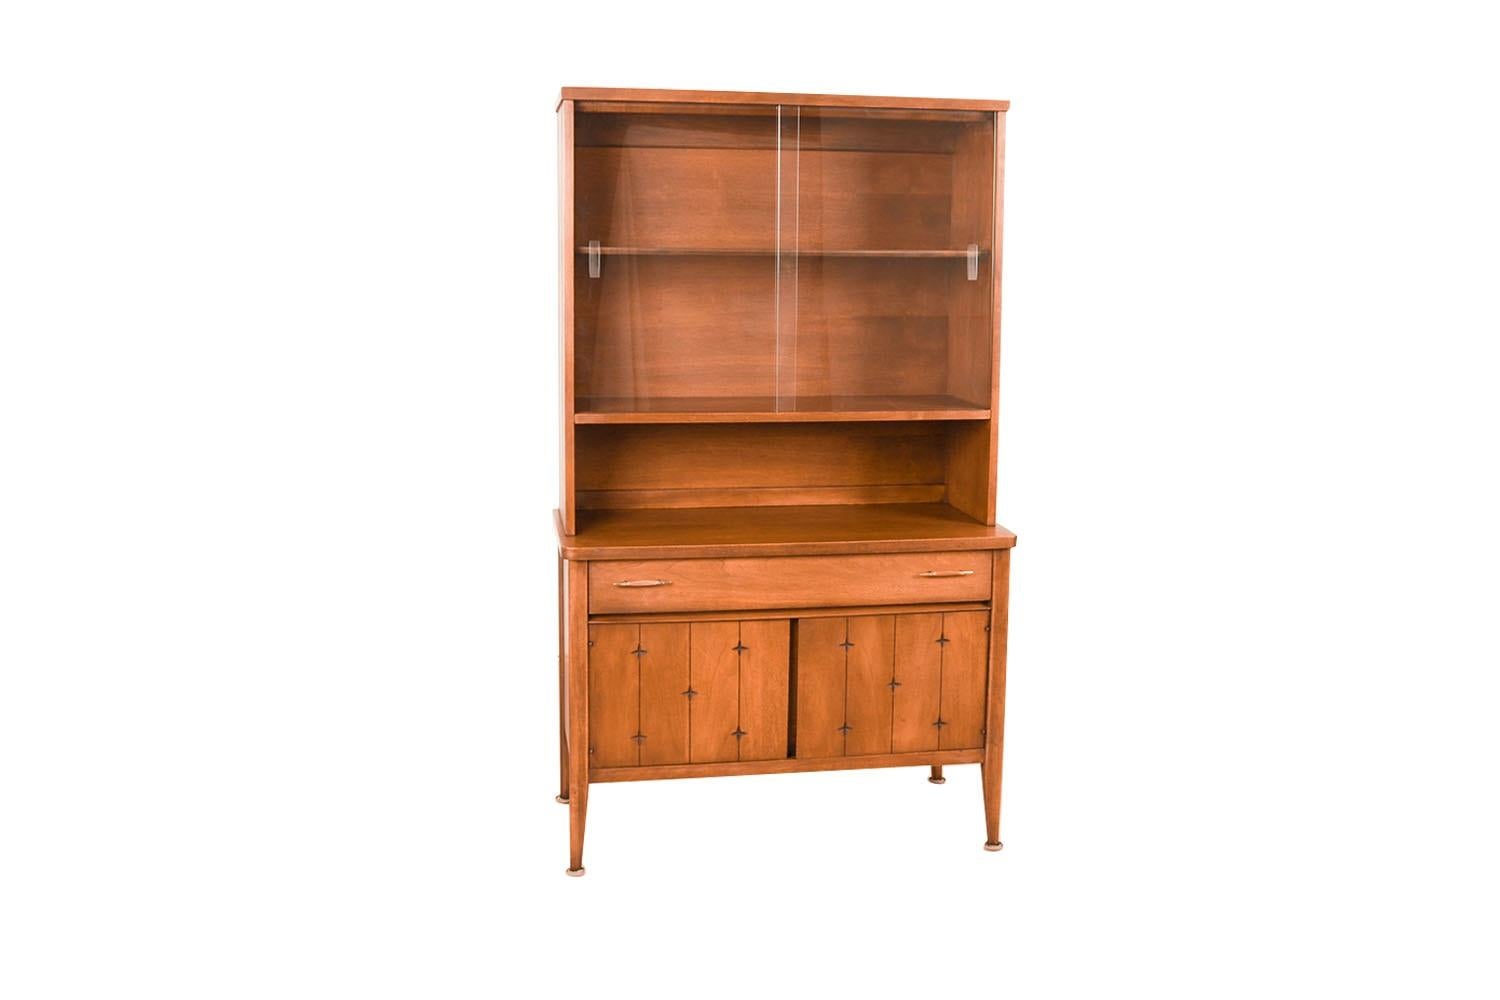 Beautiful, retro Mid-Century Modern detailed proportioned walnut Broyhill, Saga, buffet China cabinet in great original condition. The hutch is one solid-piece, featuring two sliding glass doors on top that open to reveal a beautiful interior with